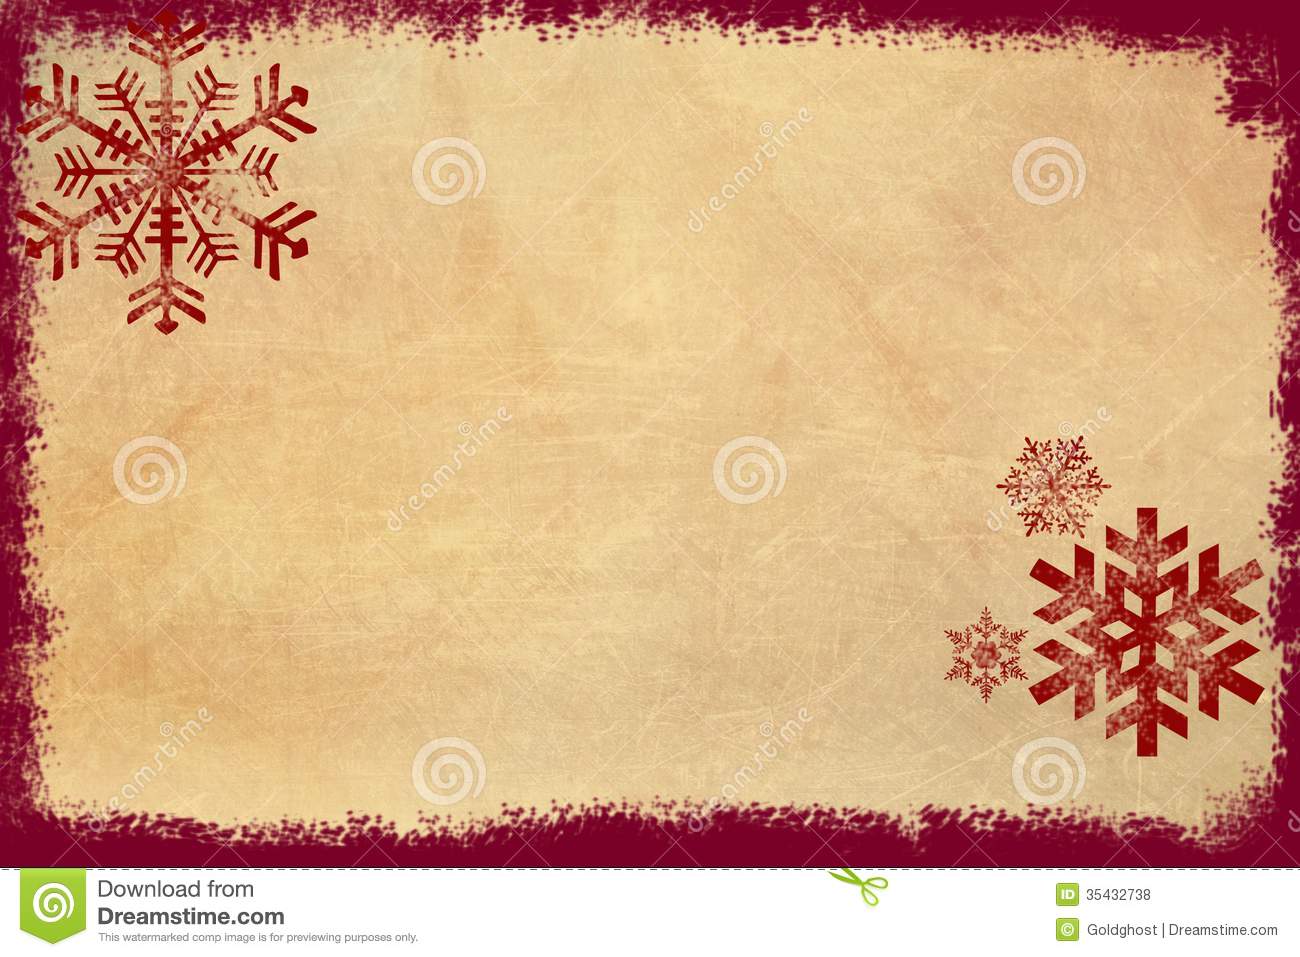 Christmas Themed Borders Image Pictures Becuo